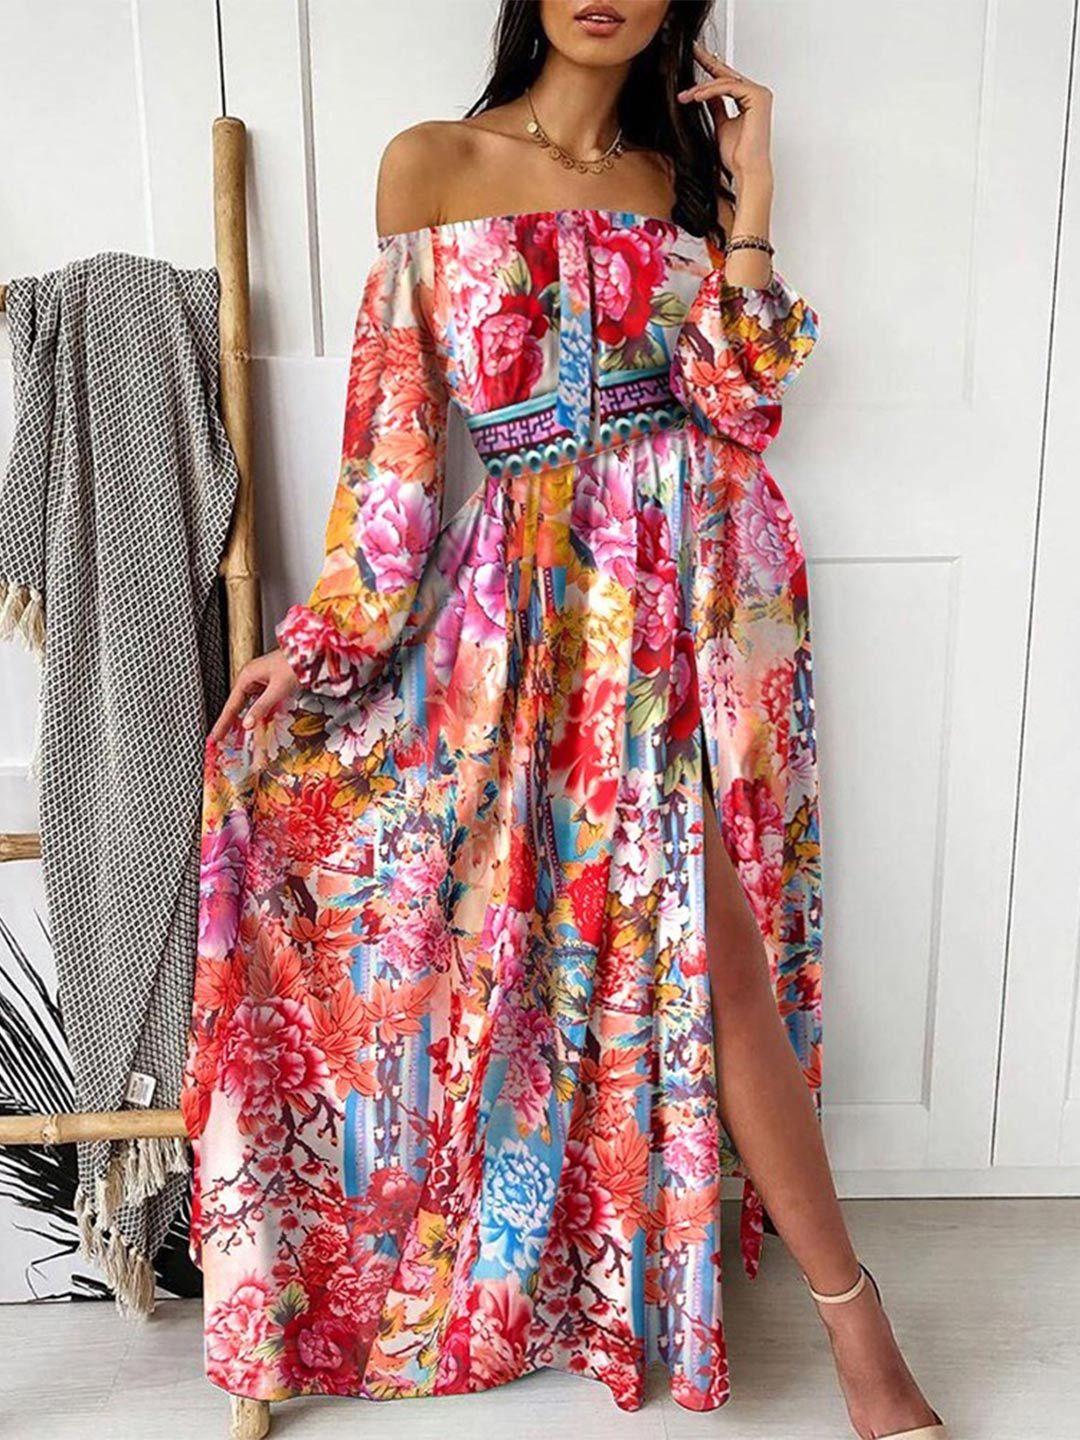 stylecast cuffed sleeves front slit off shoulder maxi dress